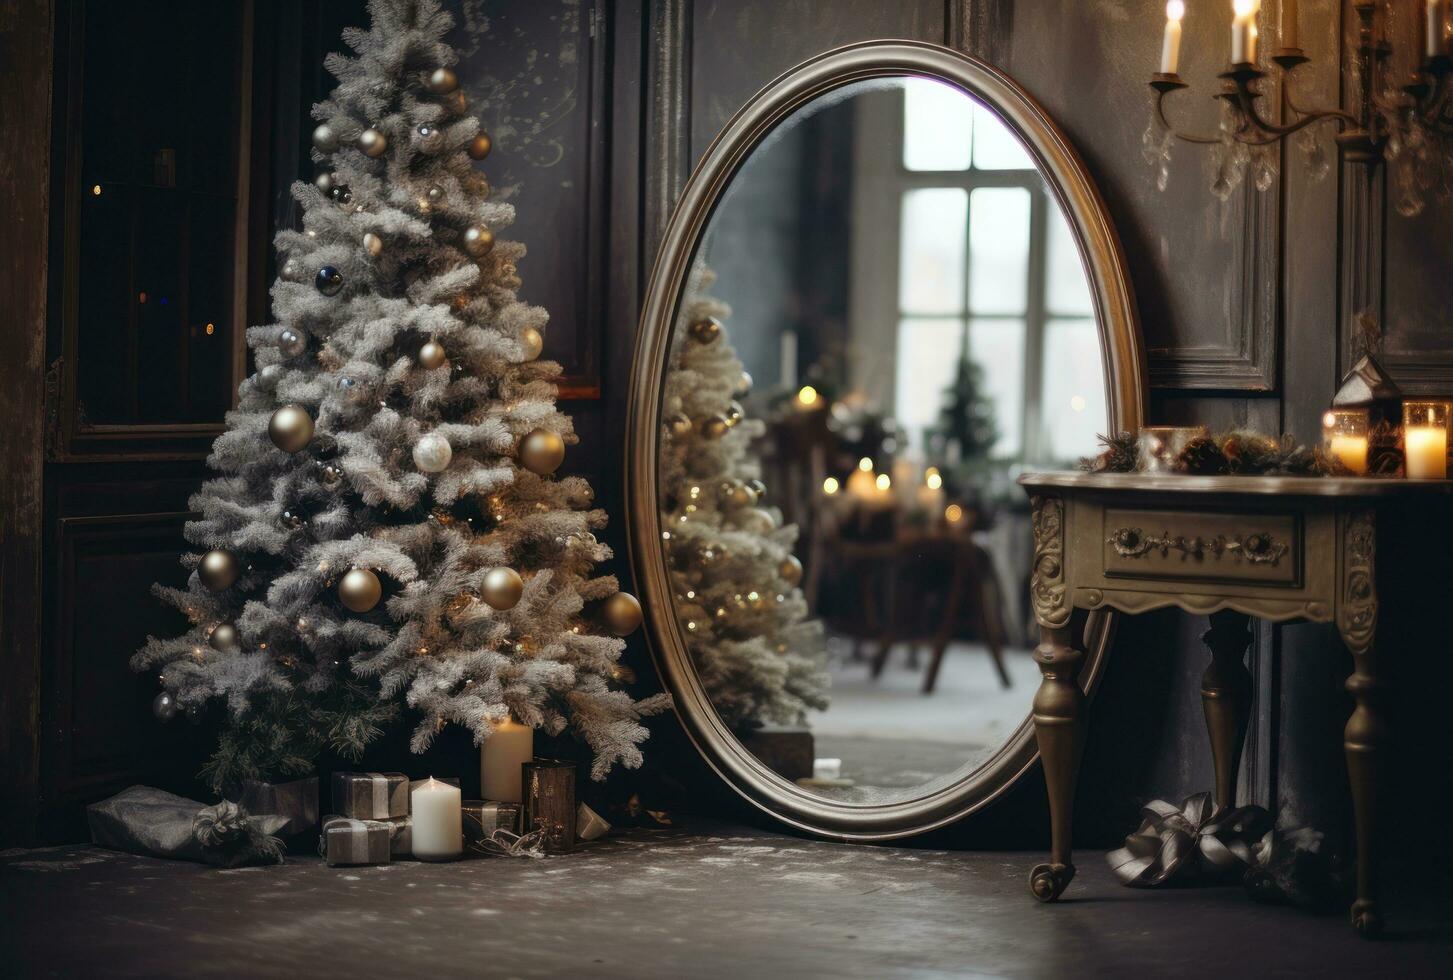 Room in an old house, an old mirror hangs on the wall, in the mirror there is an image of a decorated New Year tree photo